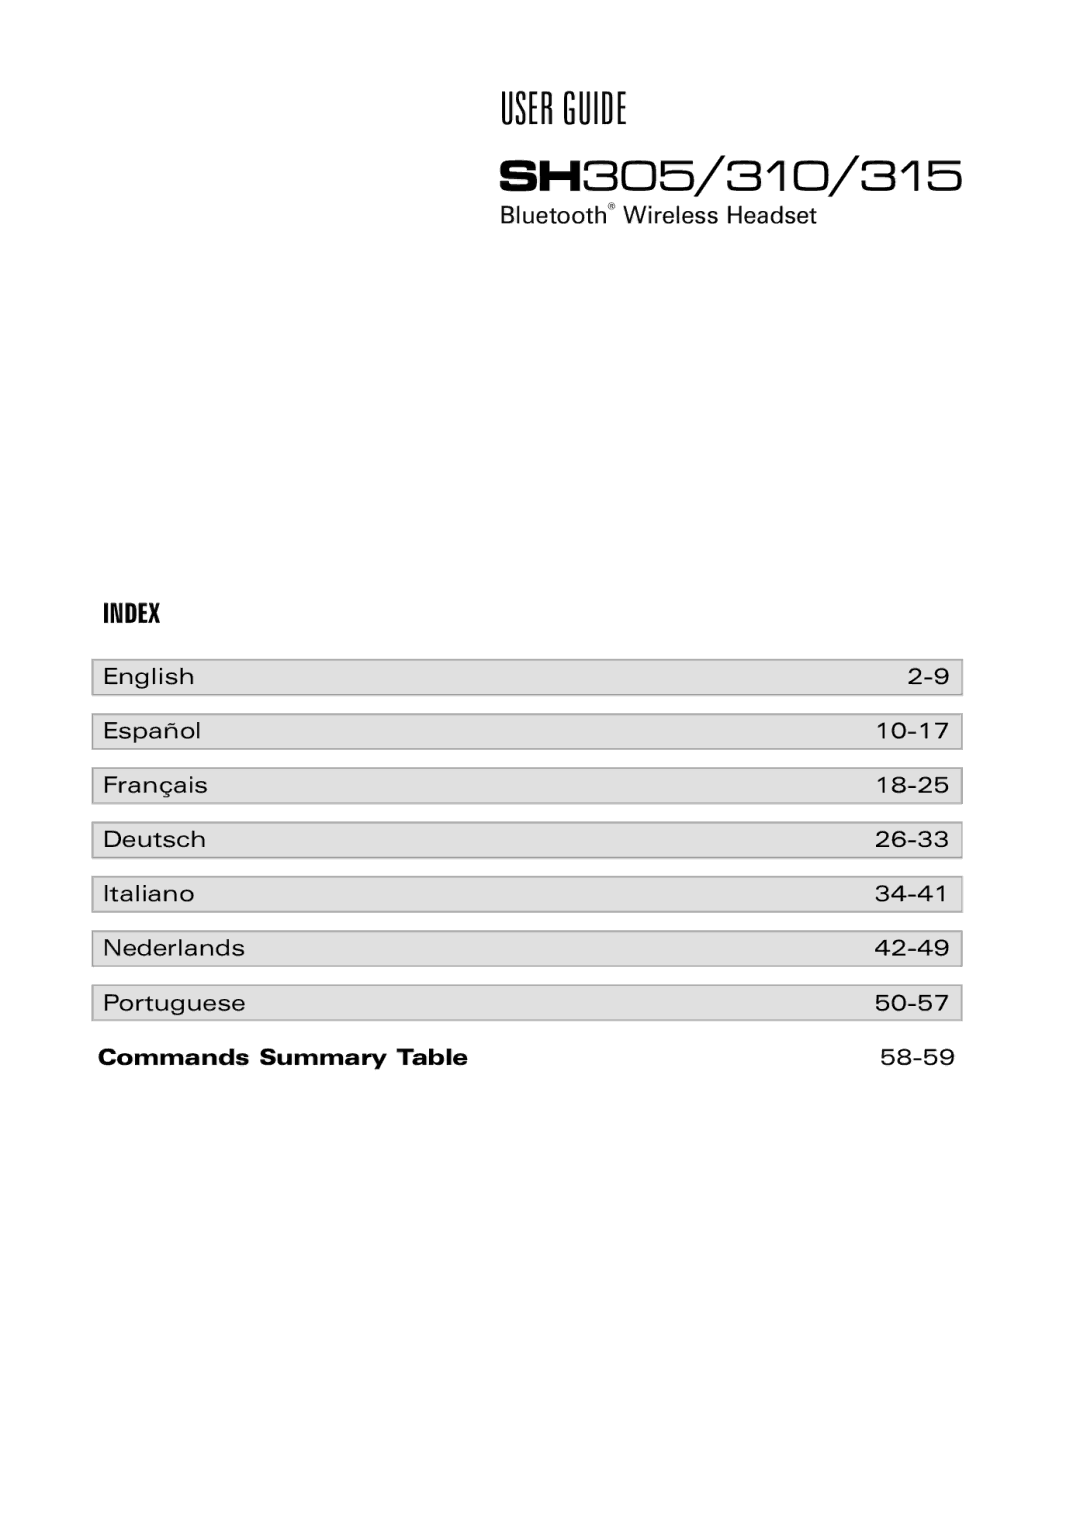 Southwing SH305, SH310, SH315 manual User Guide, Index, Commands Summary Table, 58-59 